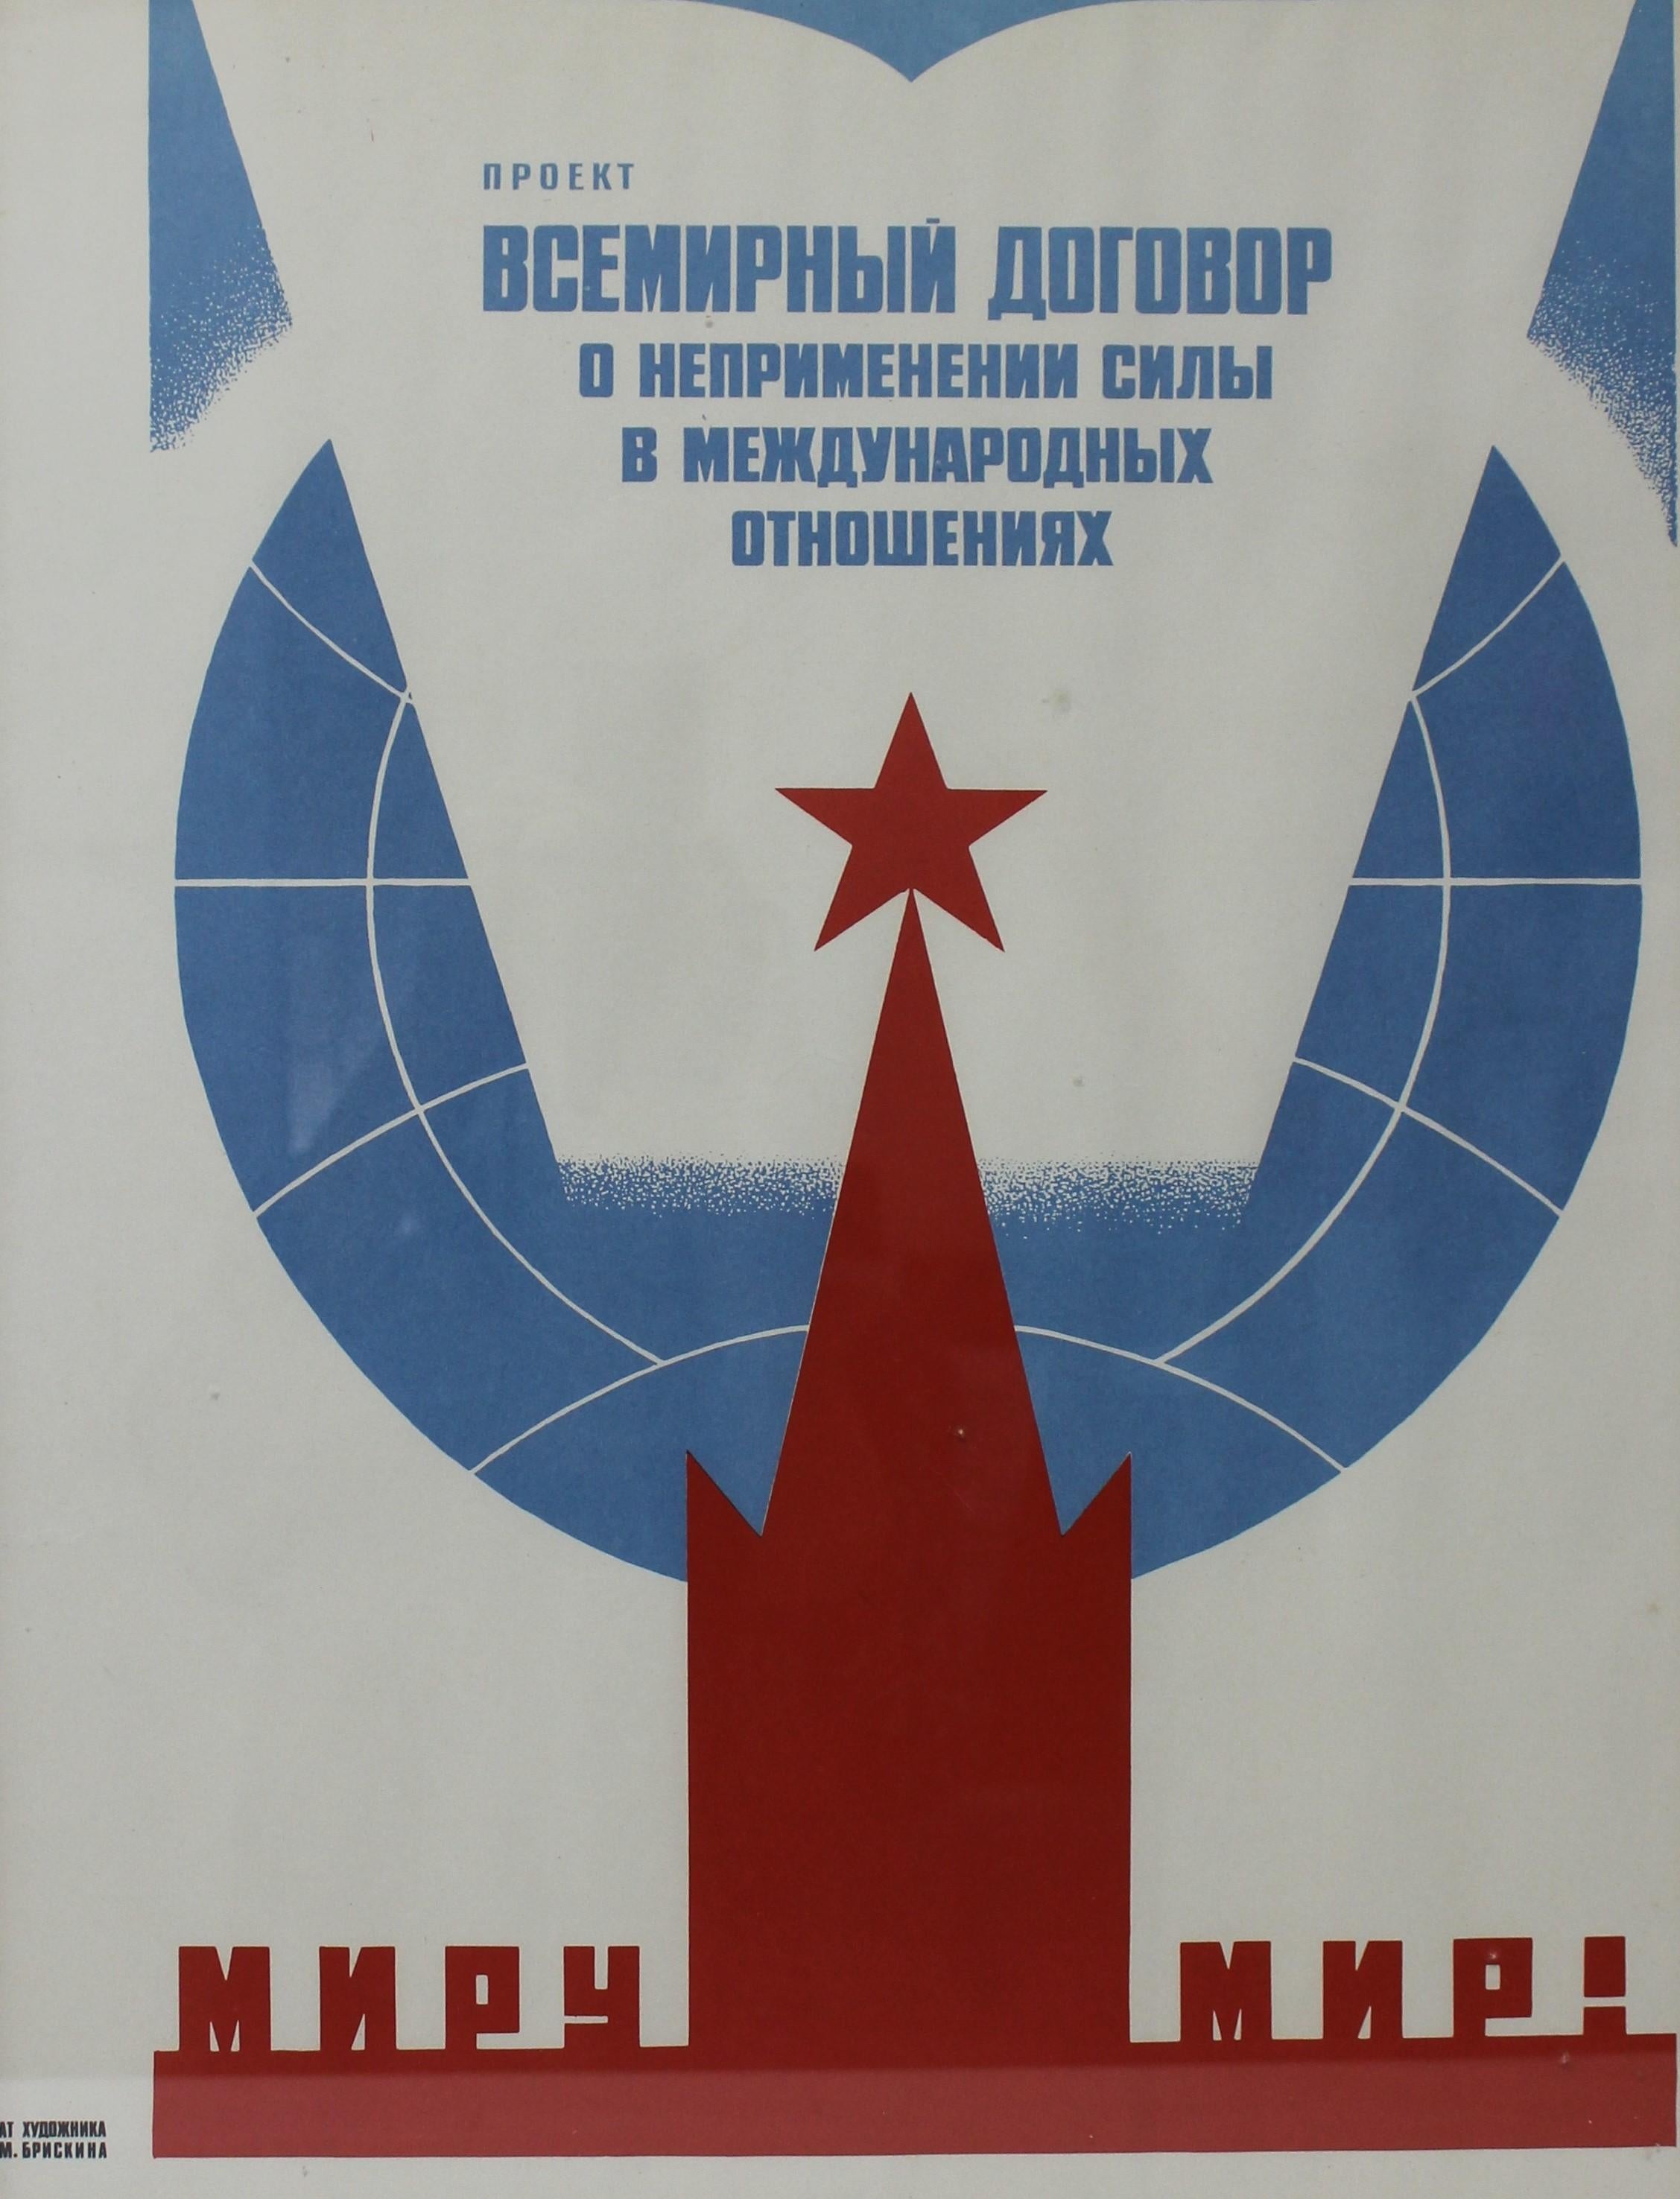 This piece packs a lot of punch with its bold graphics and use of colors to help promote the Soviet cause of the 1970s.

Translation:  “In commemoration of the international treaty against the use of nuclear force” and underneath its says Peace upon